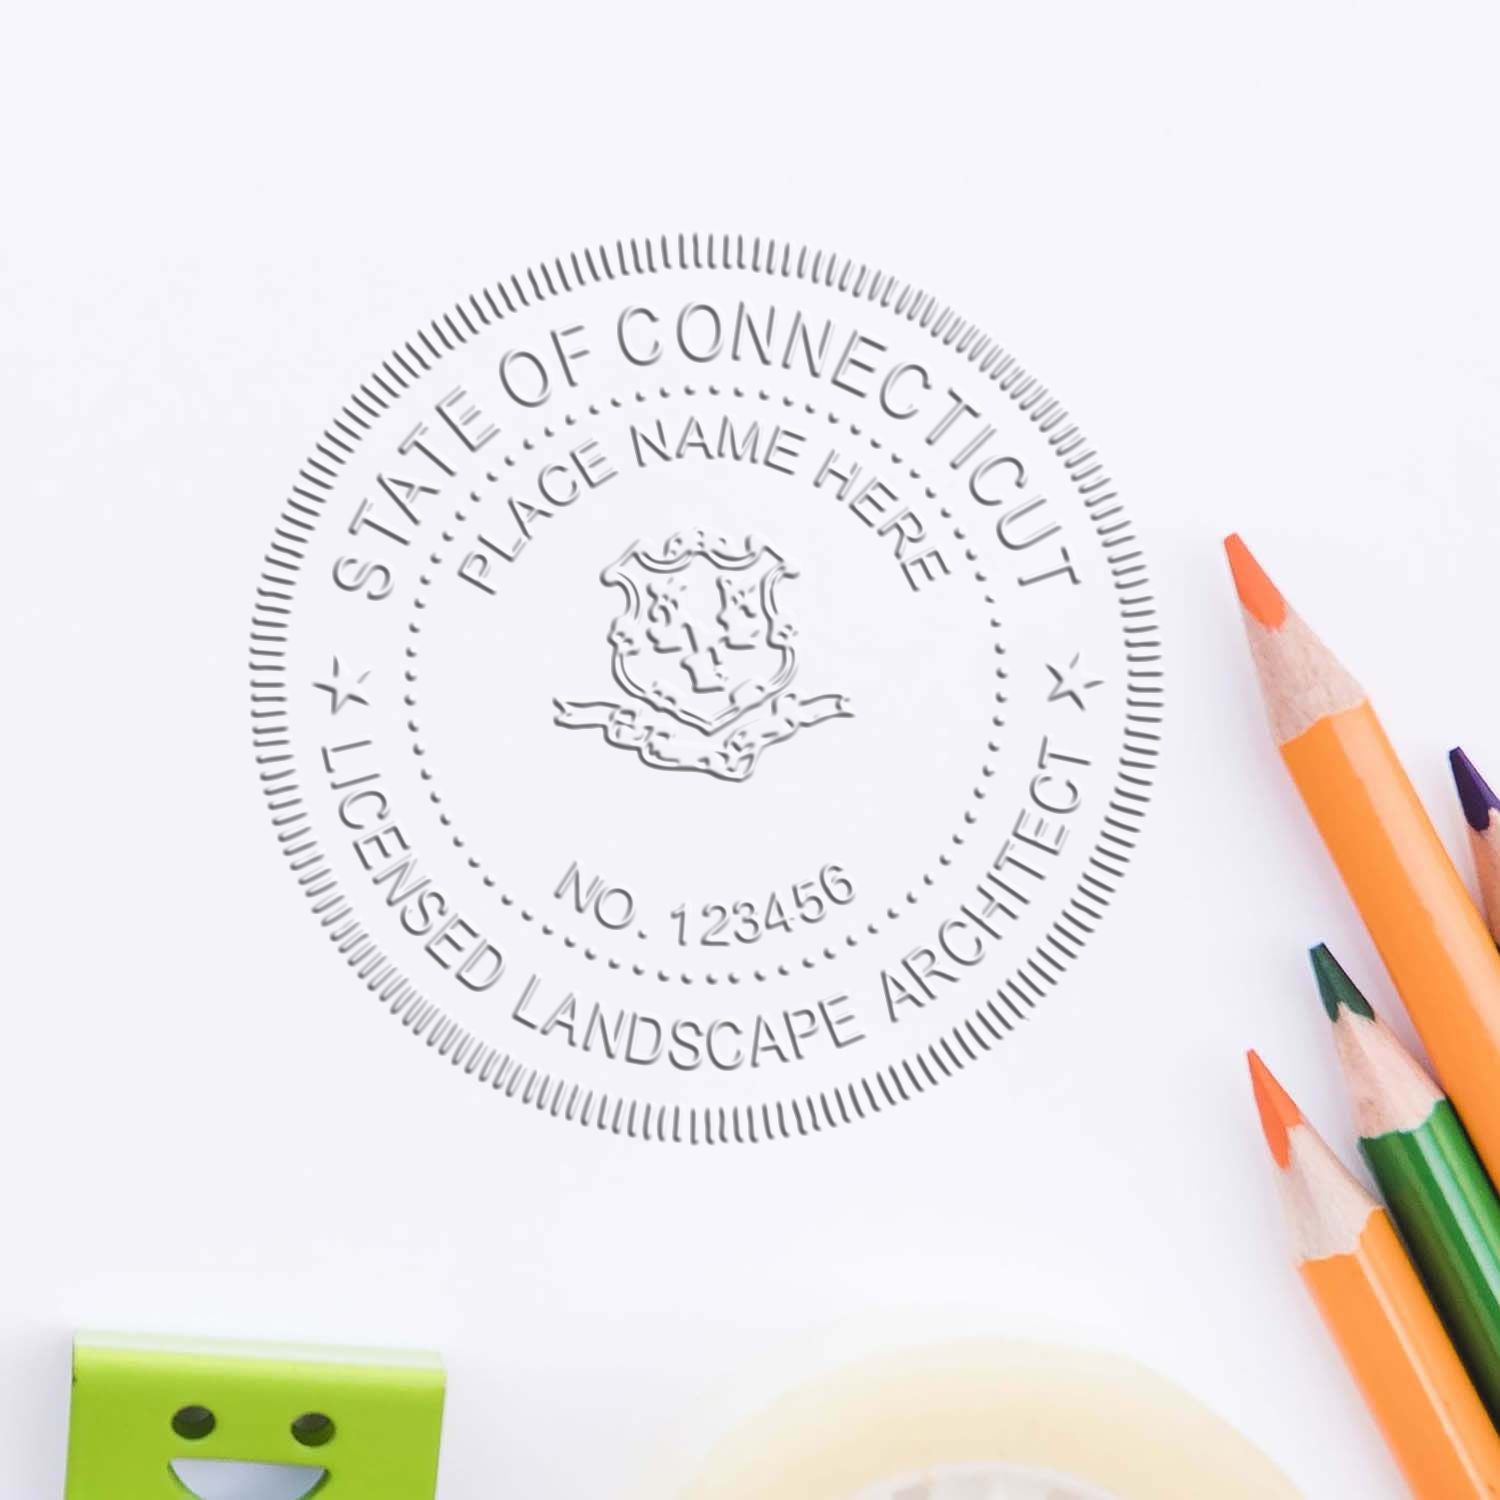 A photograph of the Connecticut Long Reach Landscape Architect Embossing Stamp stamp impression reveals a vivid, professional image of the on paper.